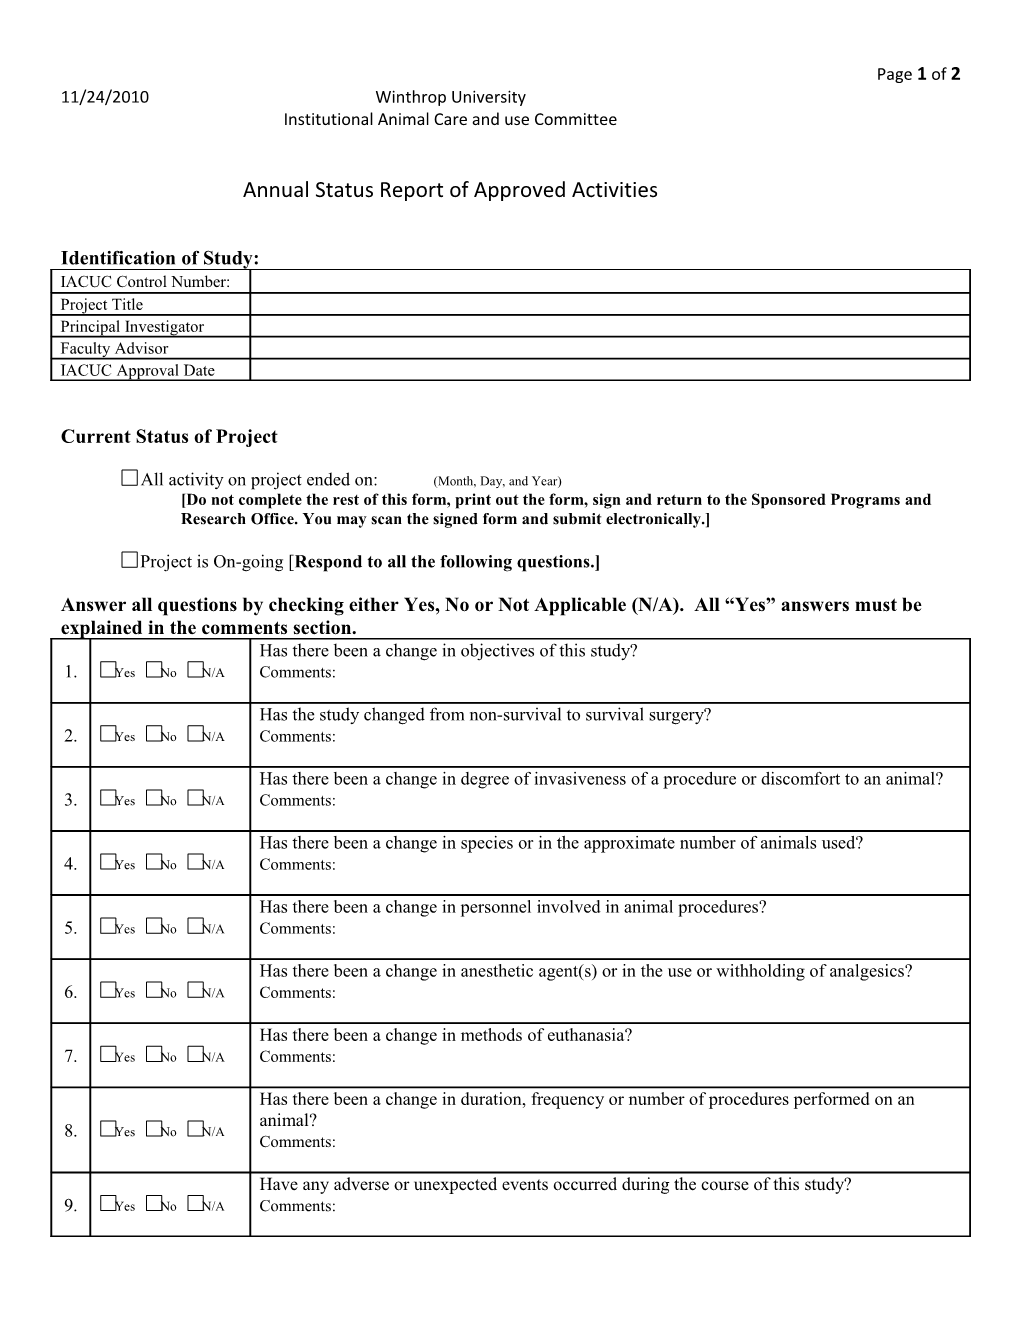 Institutional Animal Care and Use Committee Annual Status Report of Approved Activities